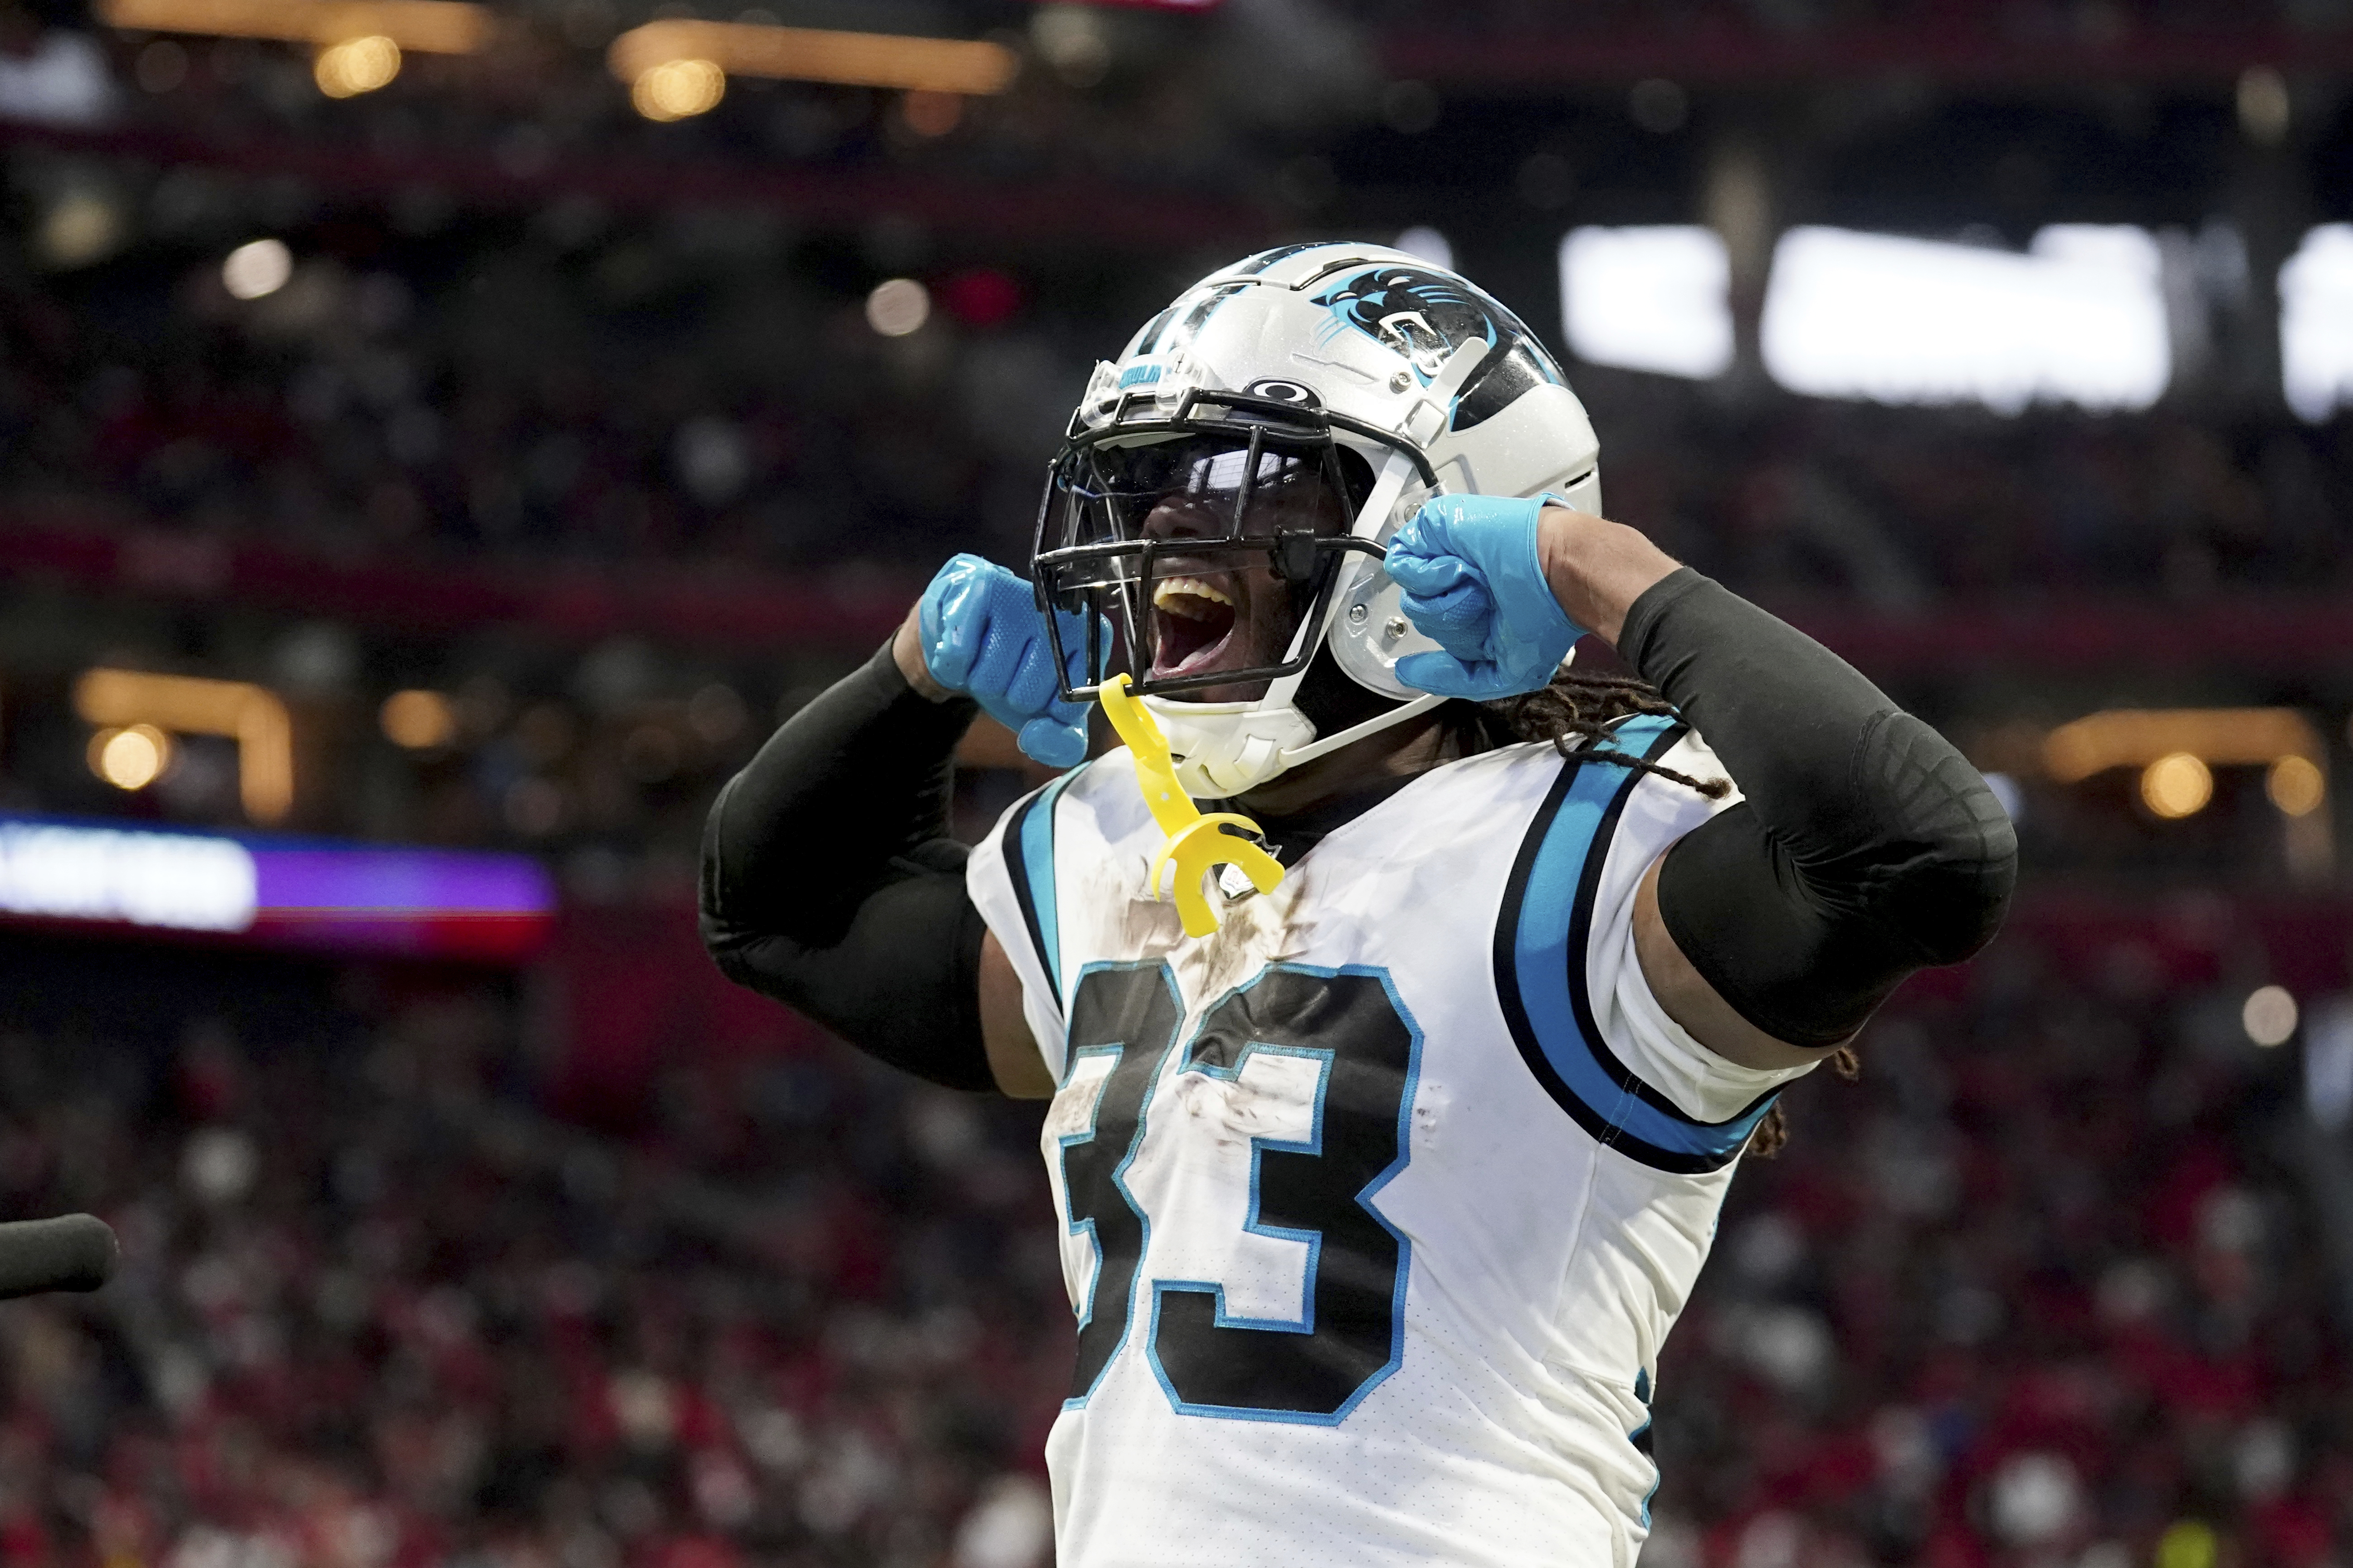 Koo's OT FG gives Falcons improbable 37-34 win over Panthers